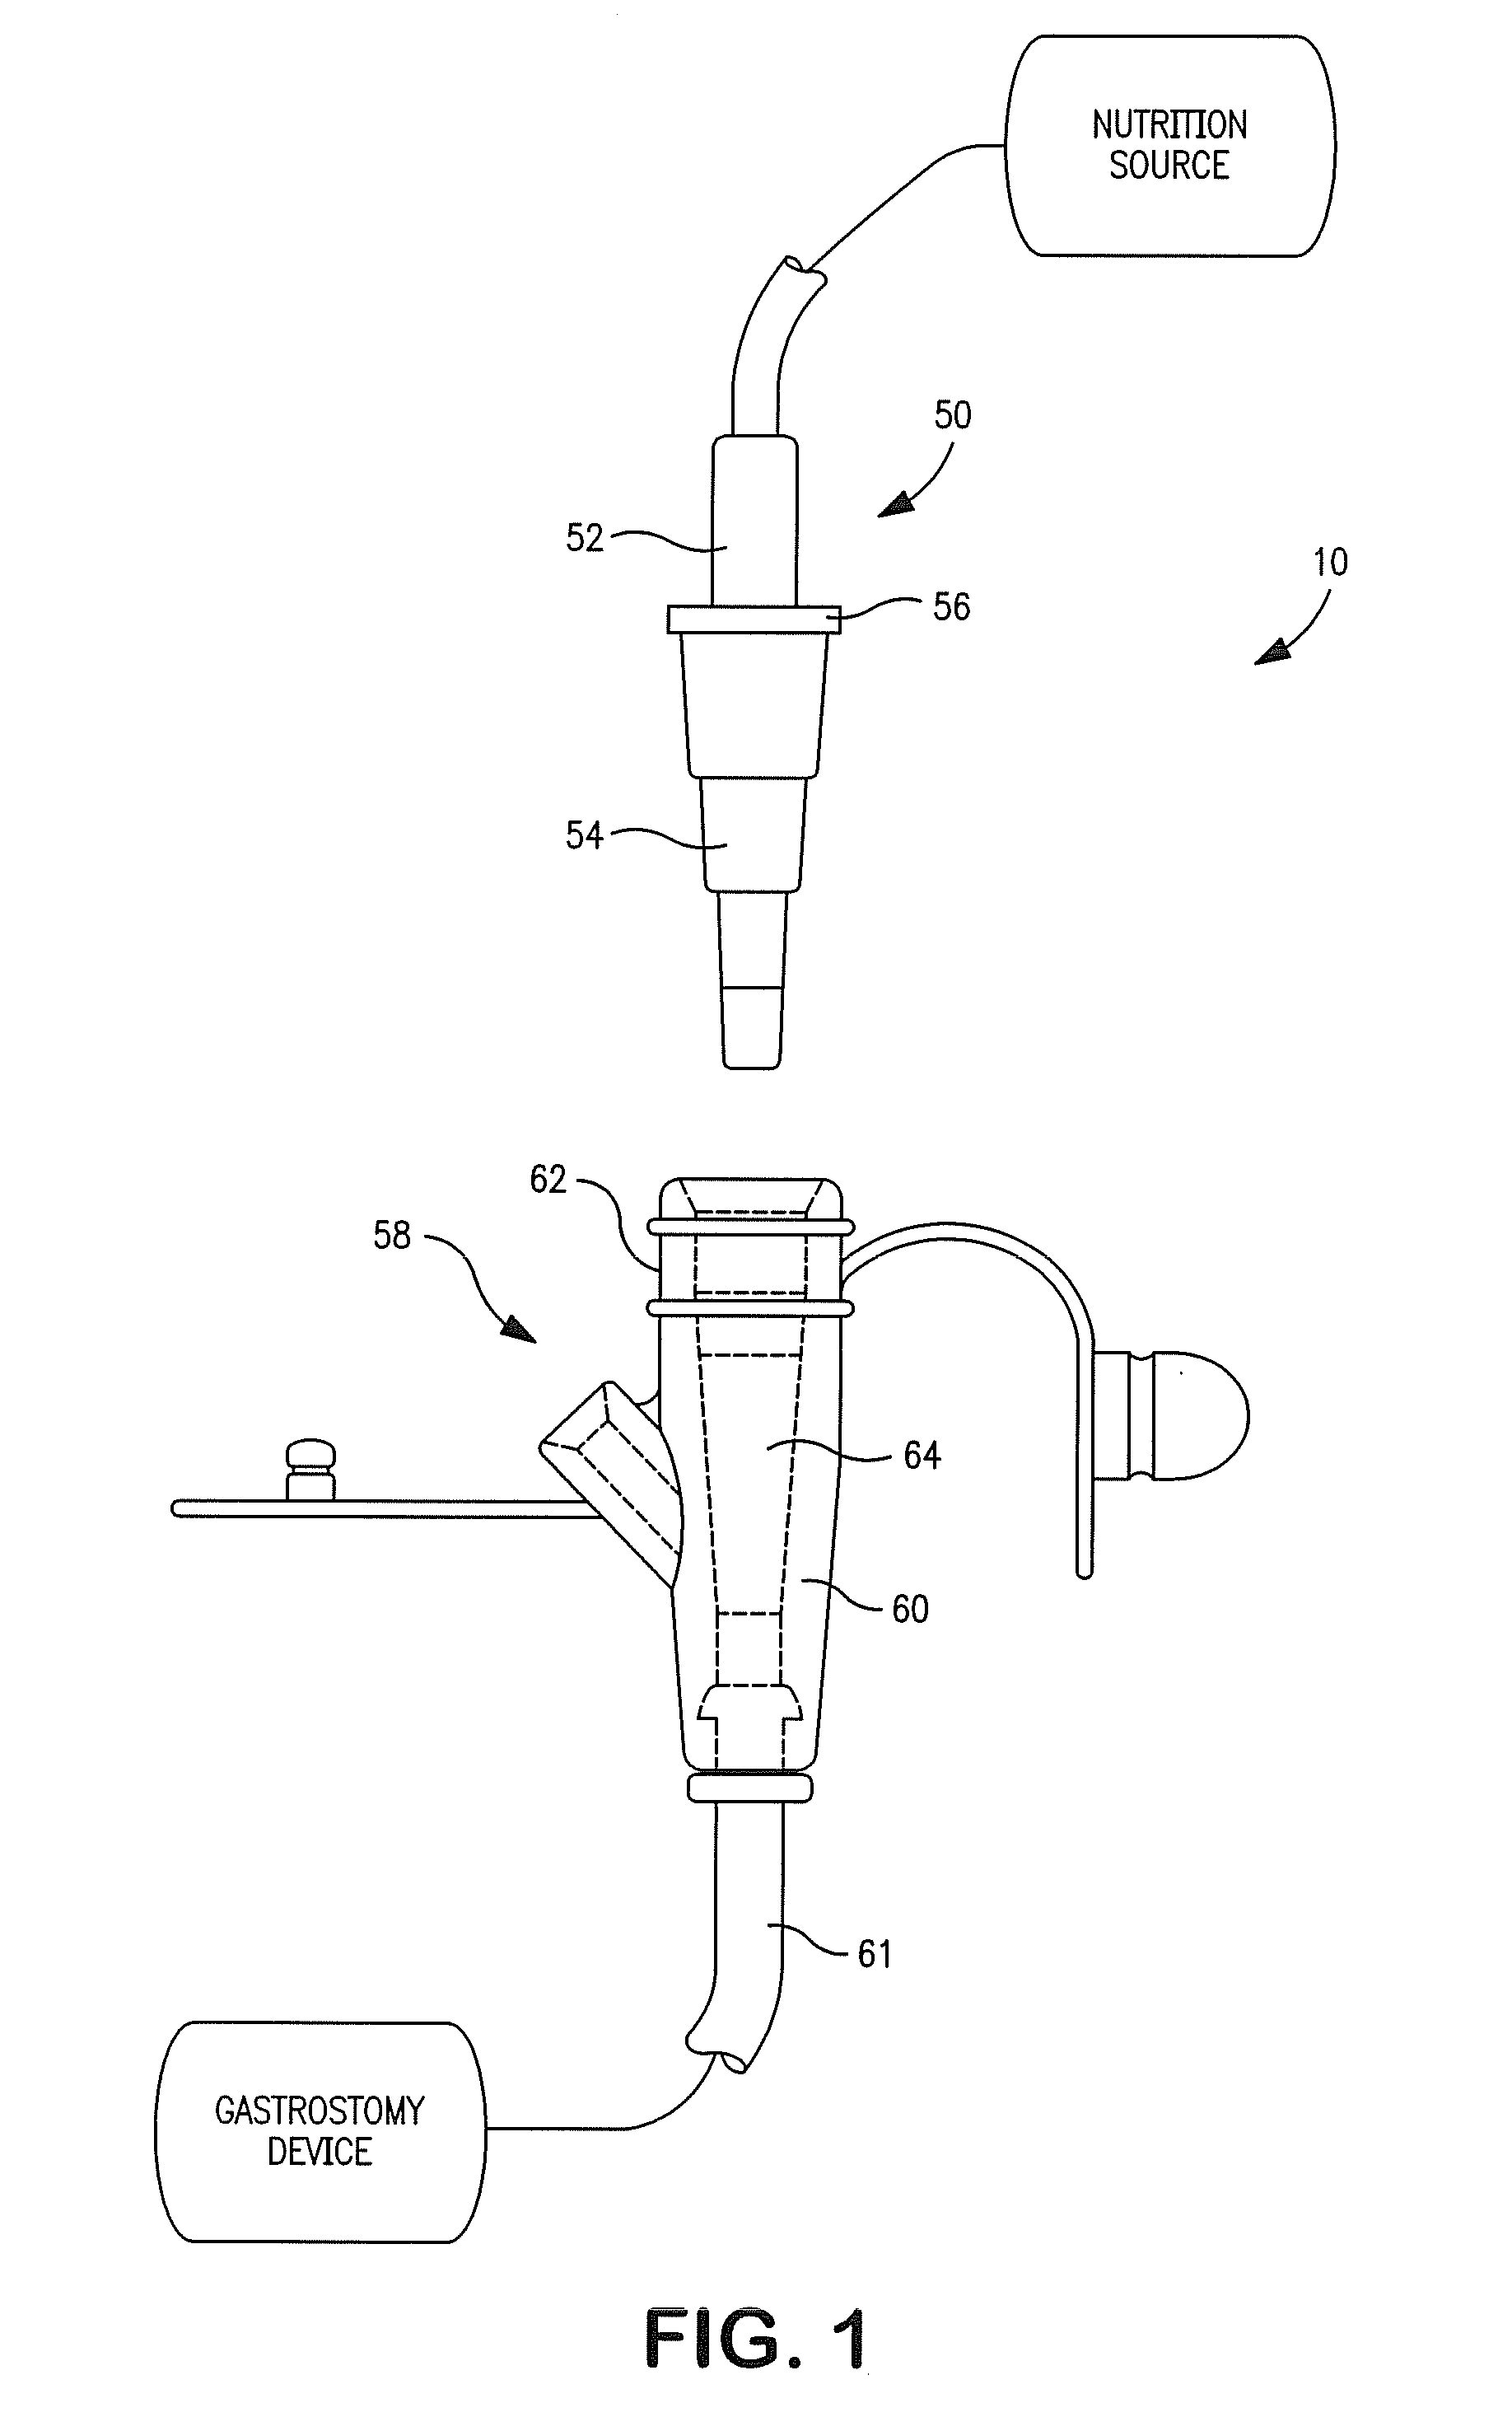 Automatic Shut-Off Connector for Enteral Feeding Devices